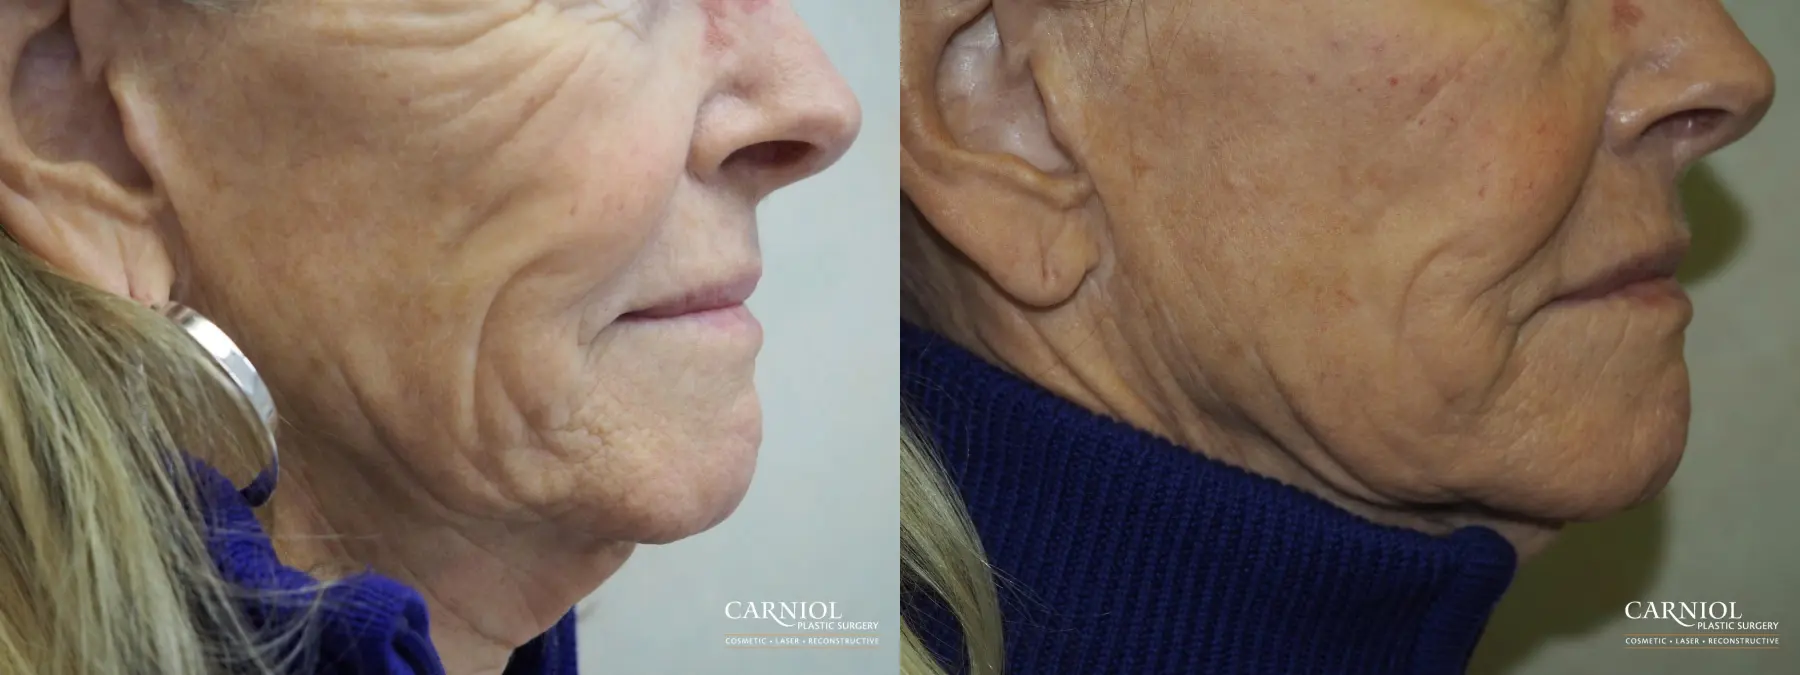 Facial Tightening: Patient 6 - Before and After  